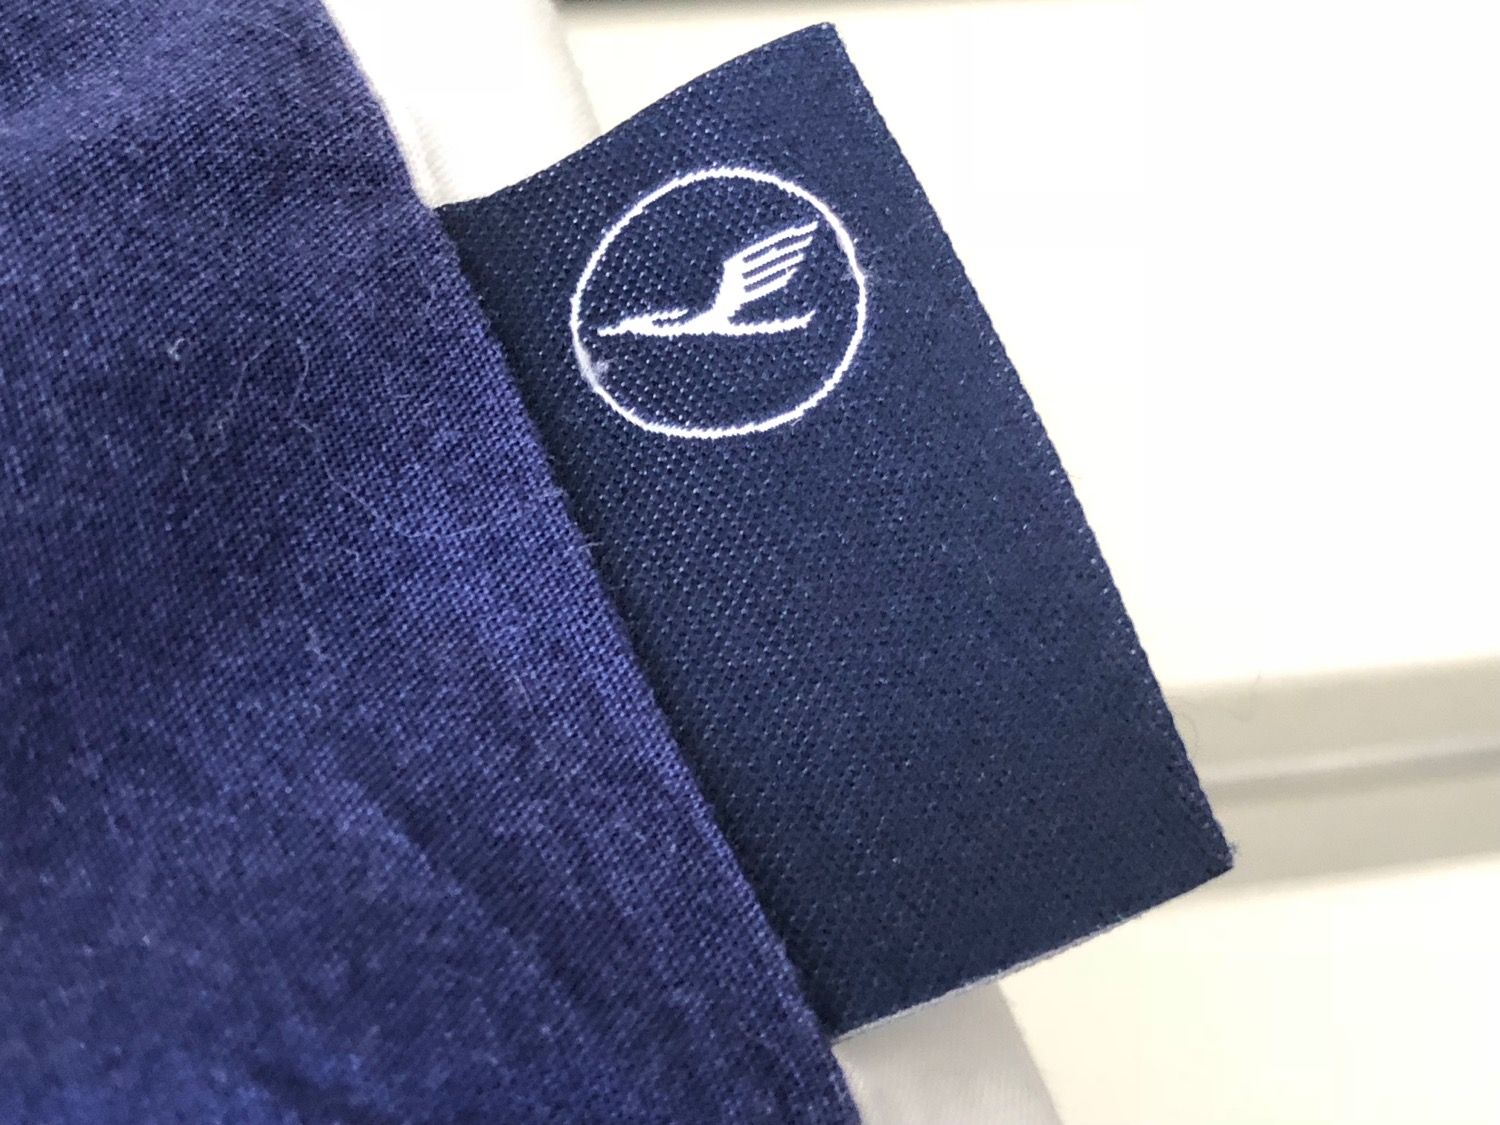 a blue fabric with a white logo